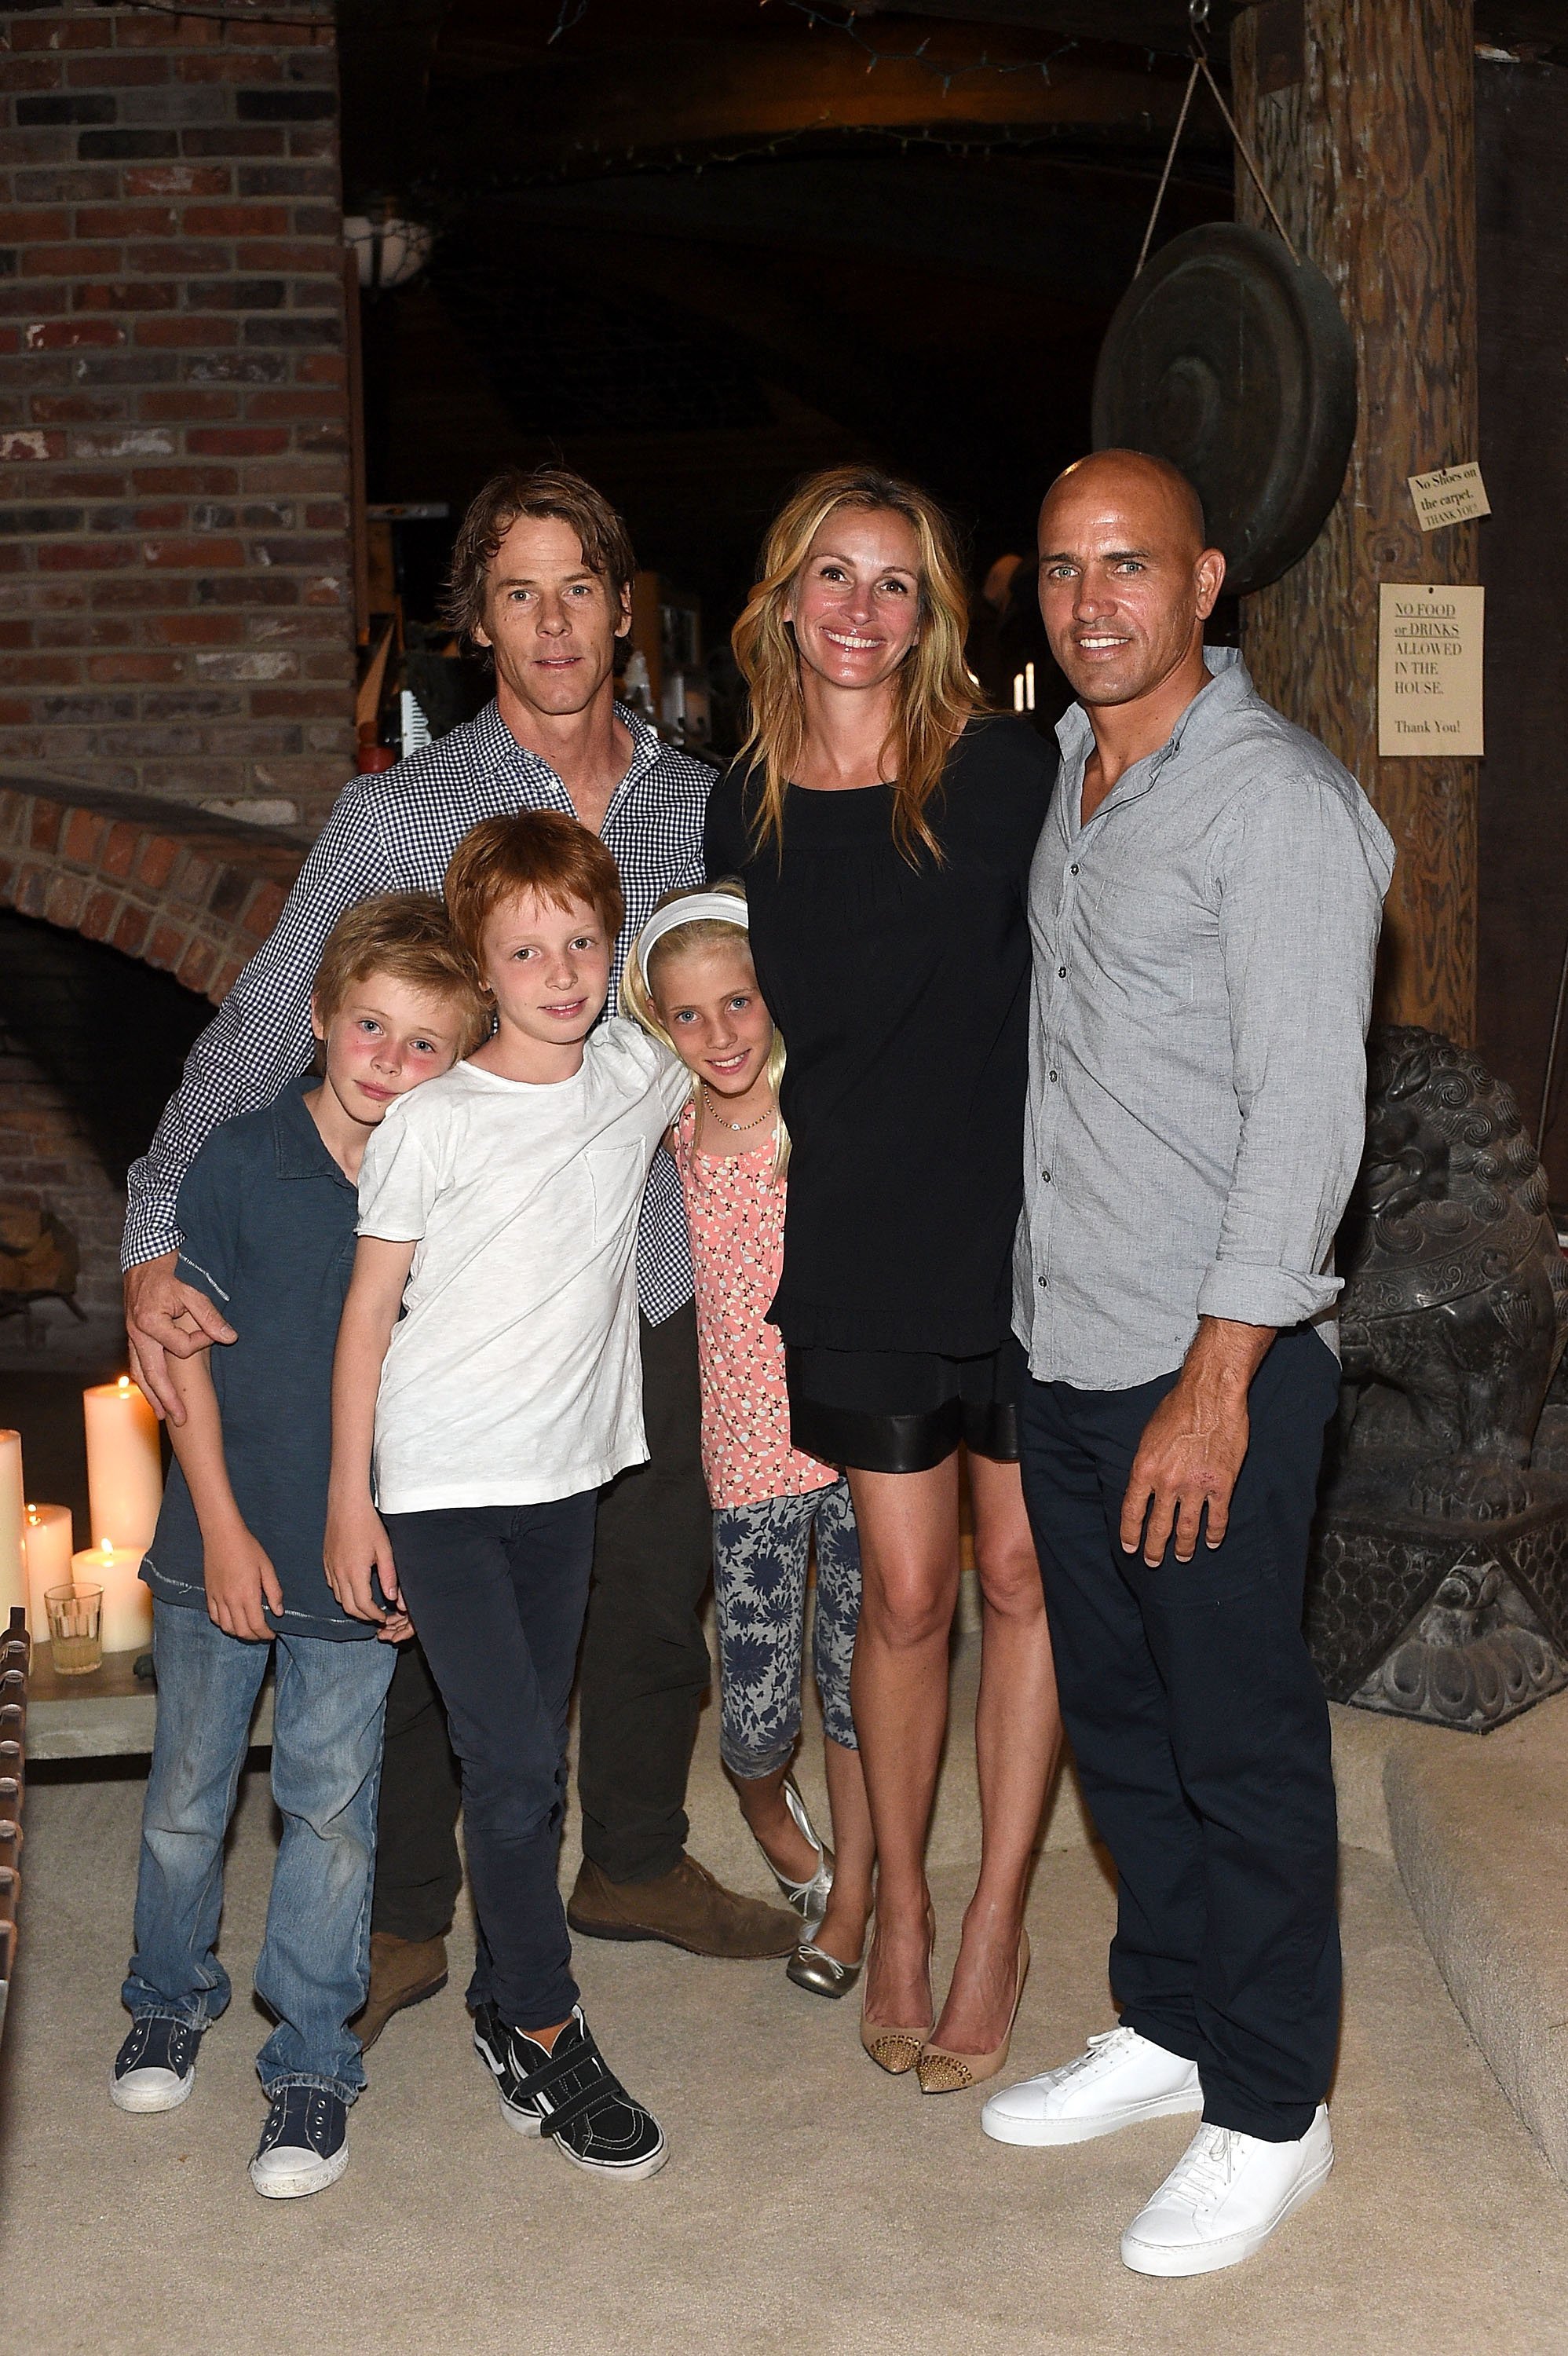 Daniel Moder, Julia Roberts, Kelly Slater, Phinnaeus Moder, Henry Daniel Moder and Hazel Moder attend Kelly Slater, John Moore and Friends Celebrate the Launch of Outerknown at Private Residence on August 29, 2015, in Malibu, California. | Source: Getty Images.